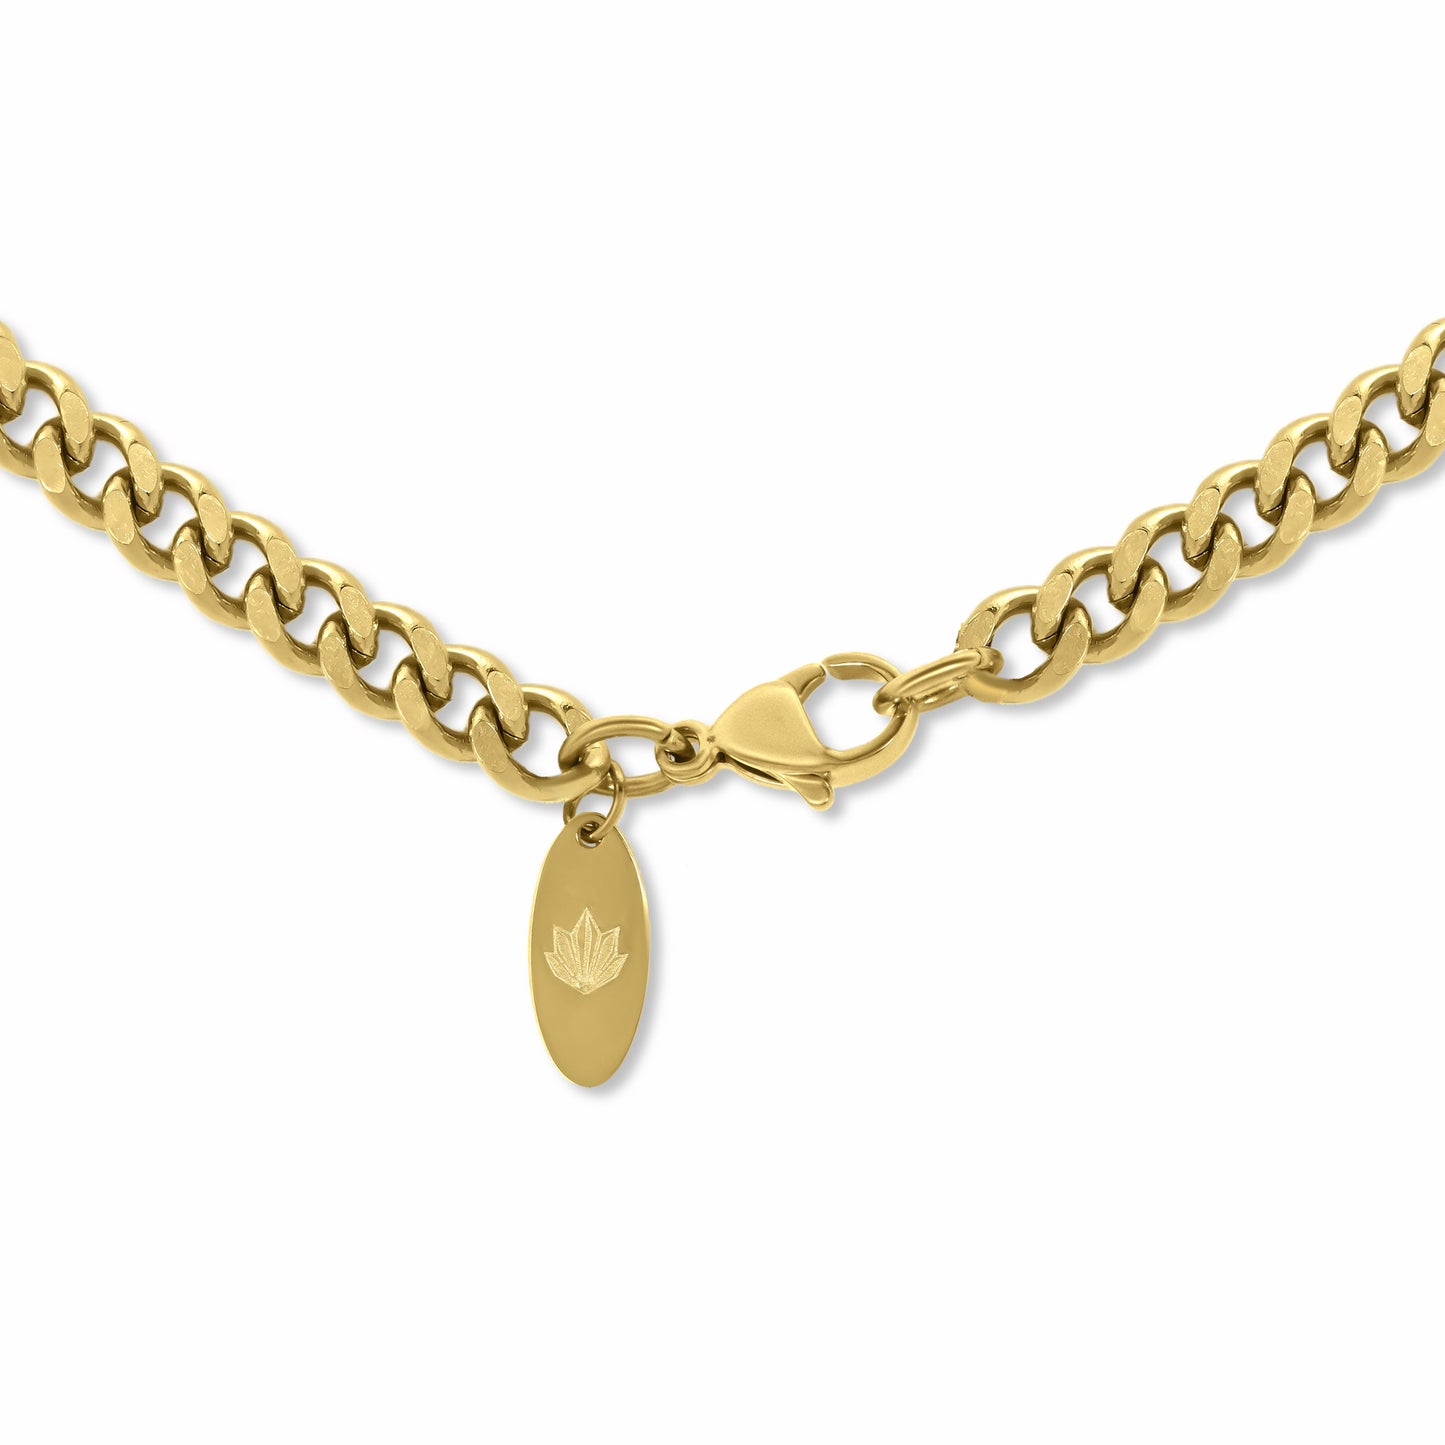 Cuban Chain Gold 5mm - clasp with engraved logo tag on white background